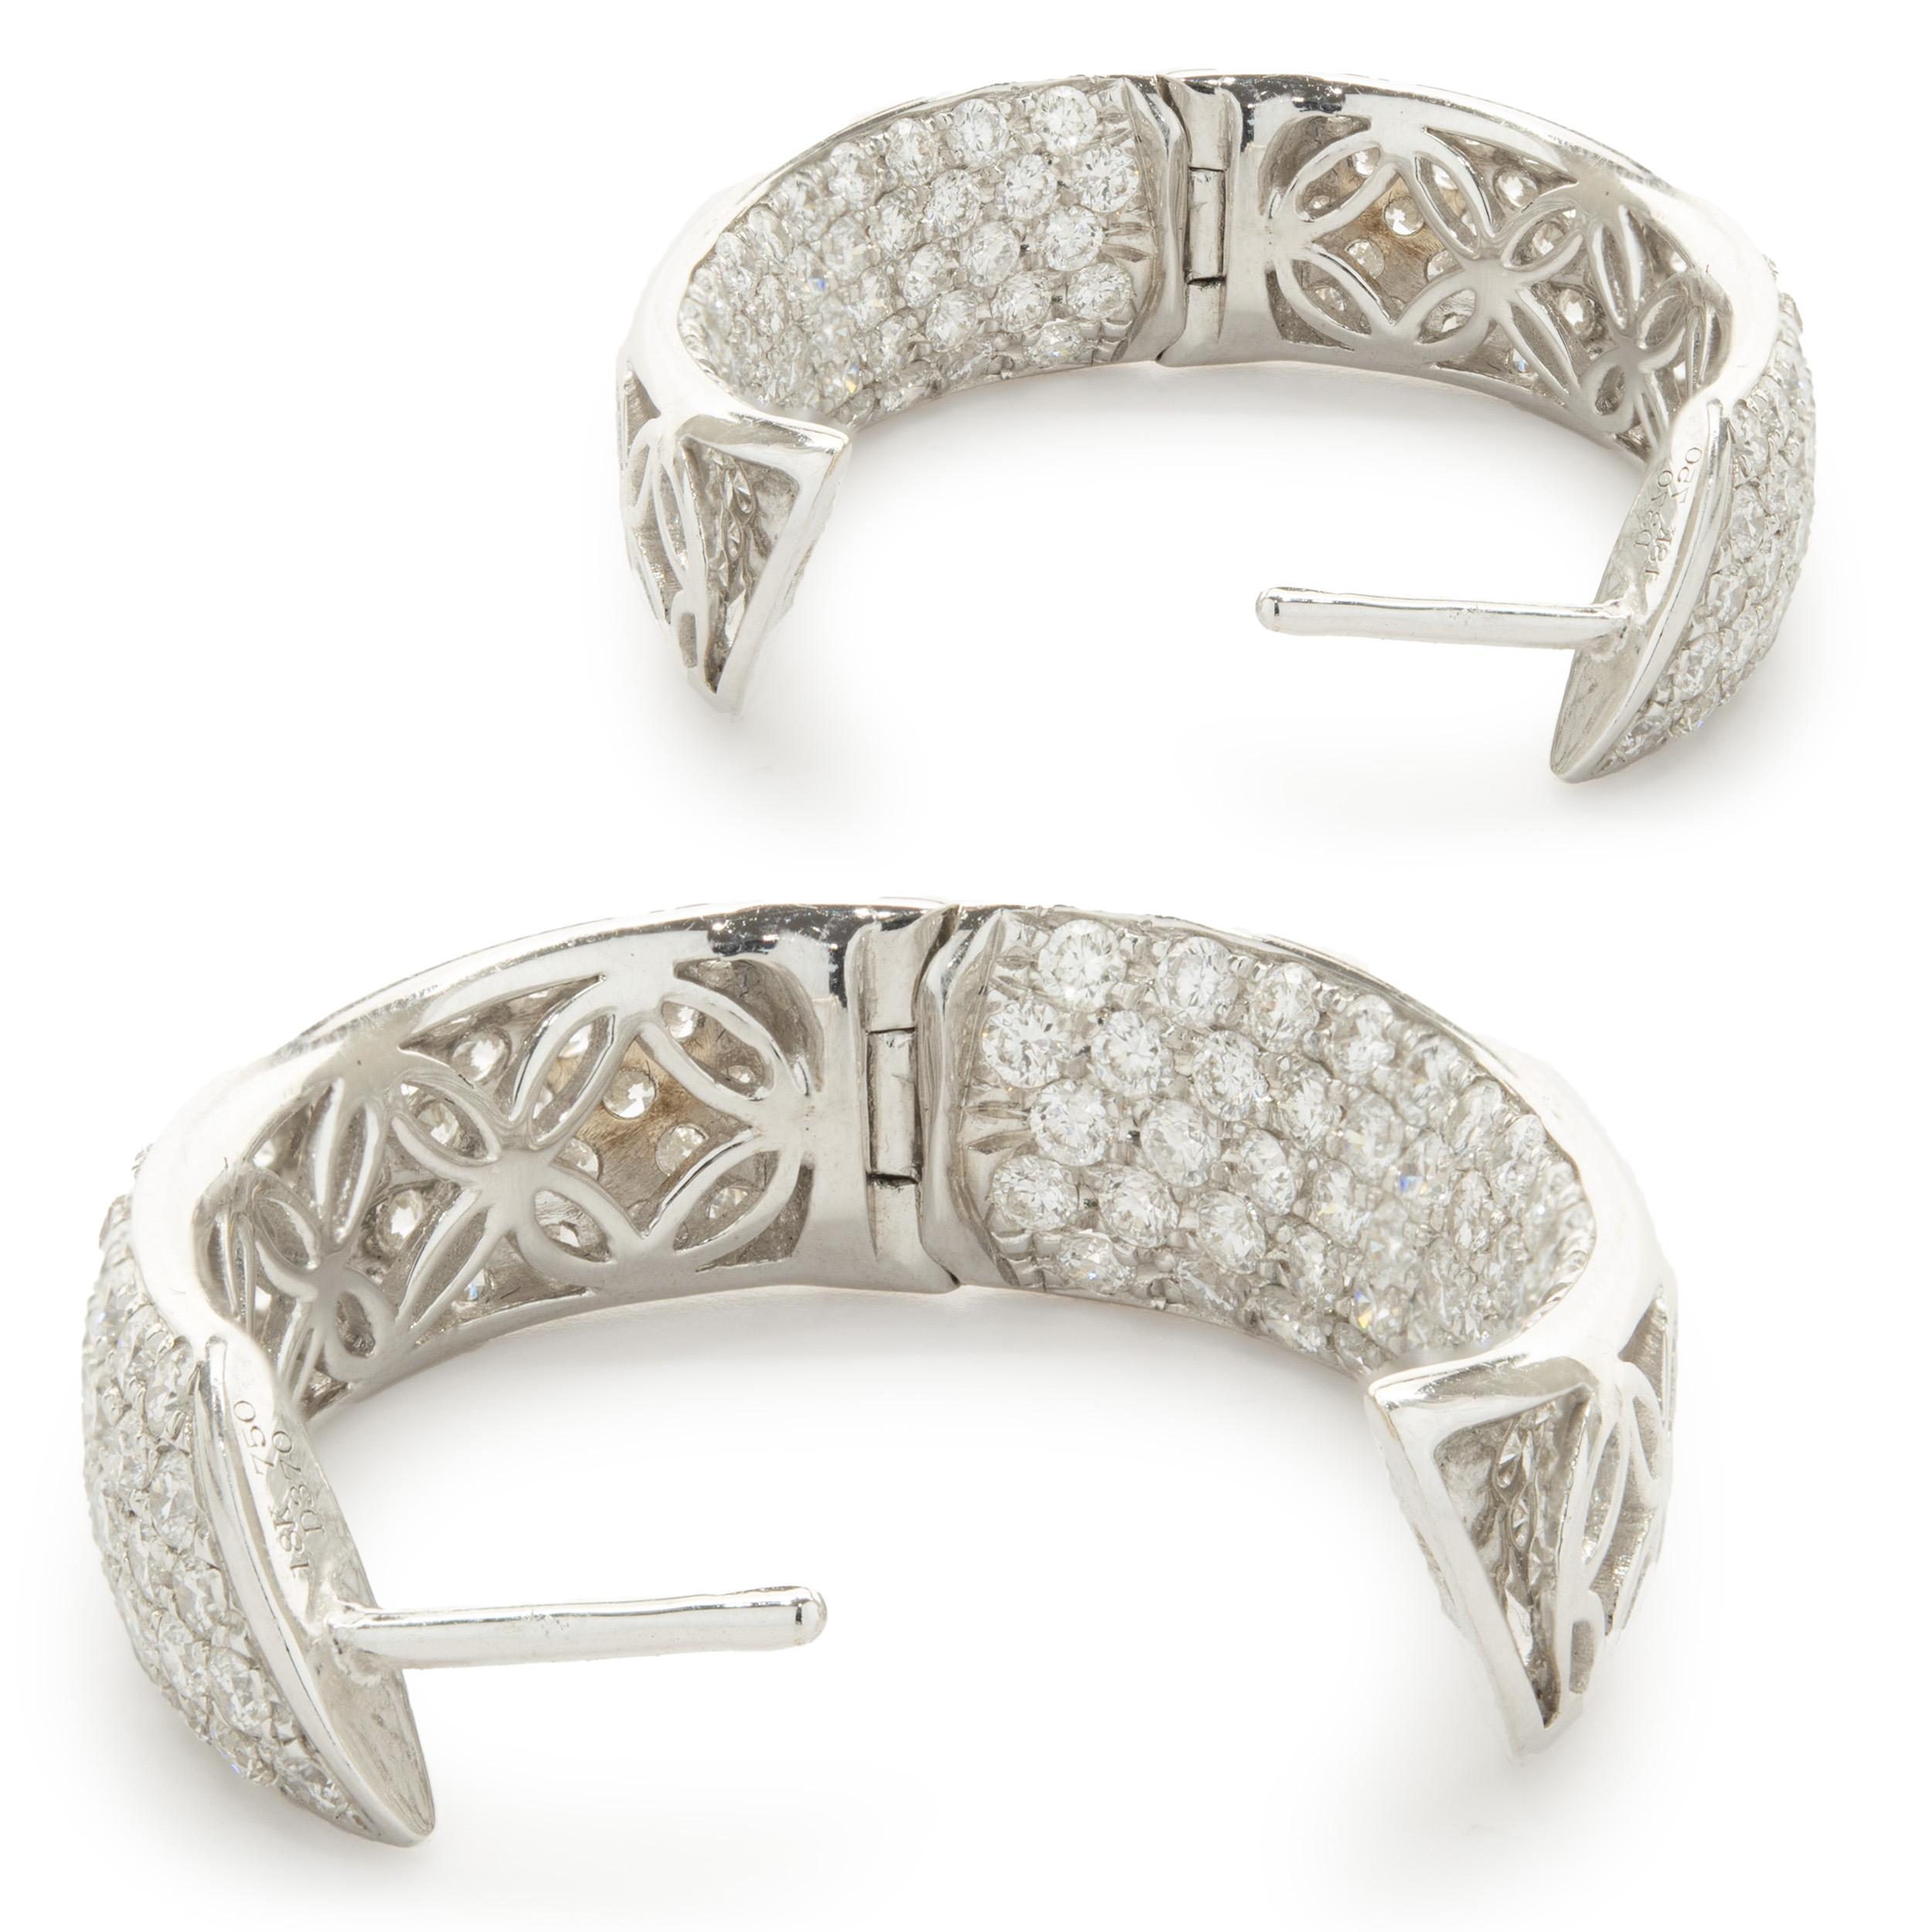 18 Karat White Gold Pave Diamond Inside Outside Hoop Earrings In Excellent Condition For Sale In Scottsdale, AZ